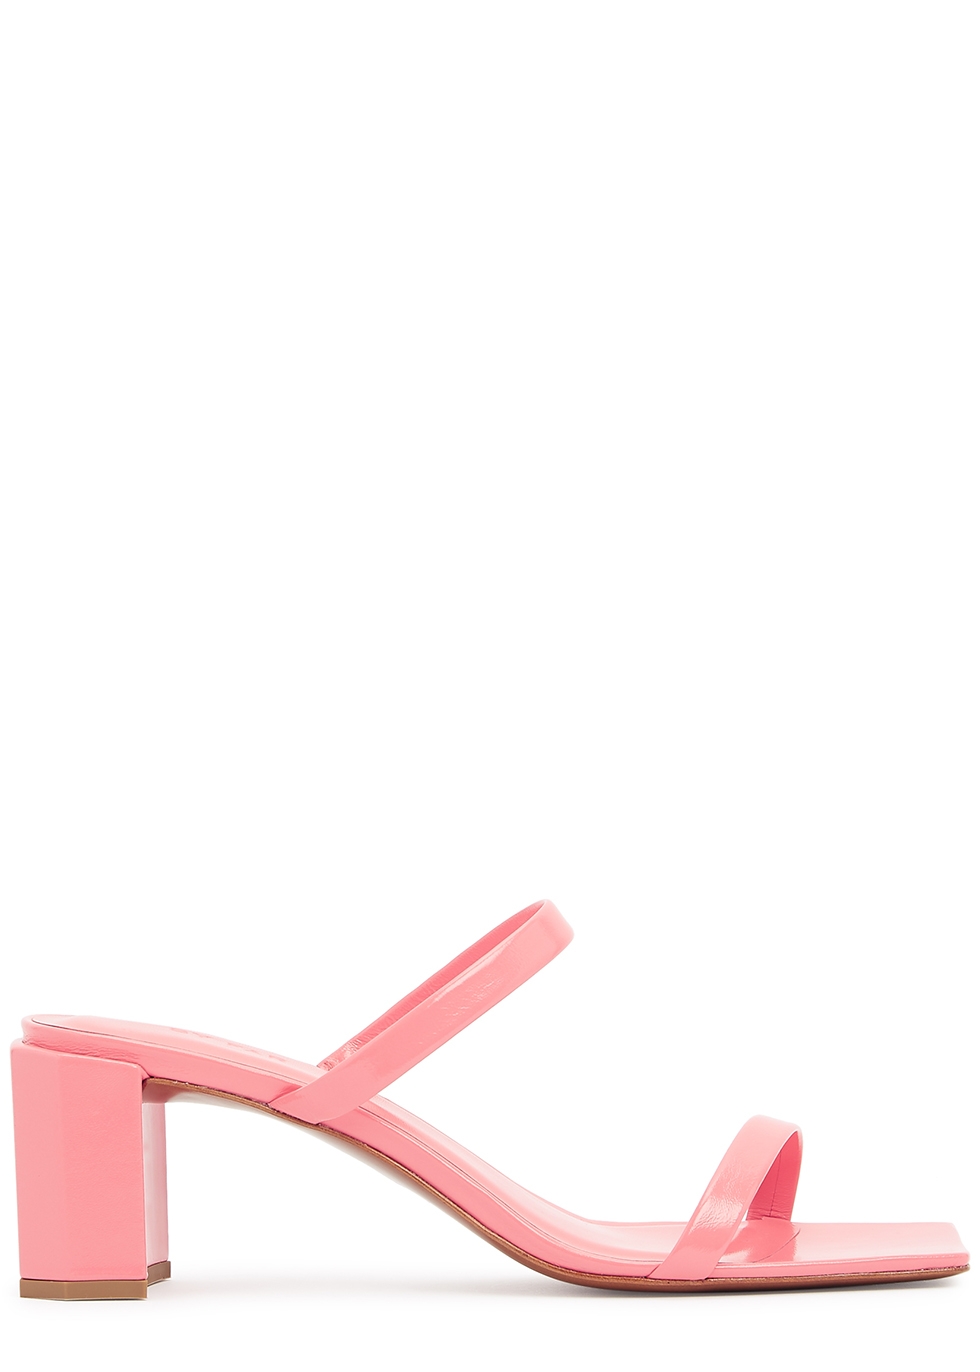 Tanya 75 pink leather mules